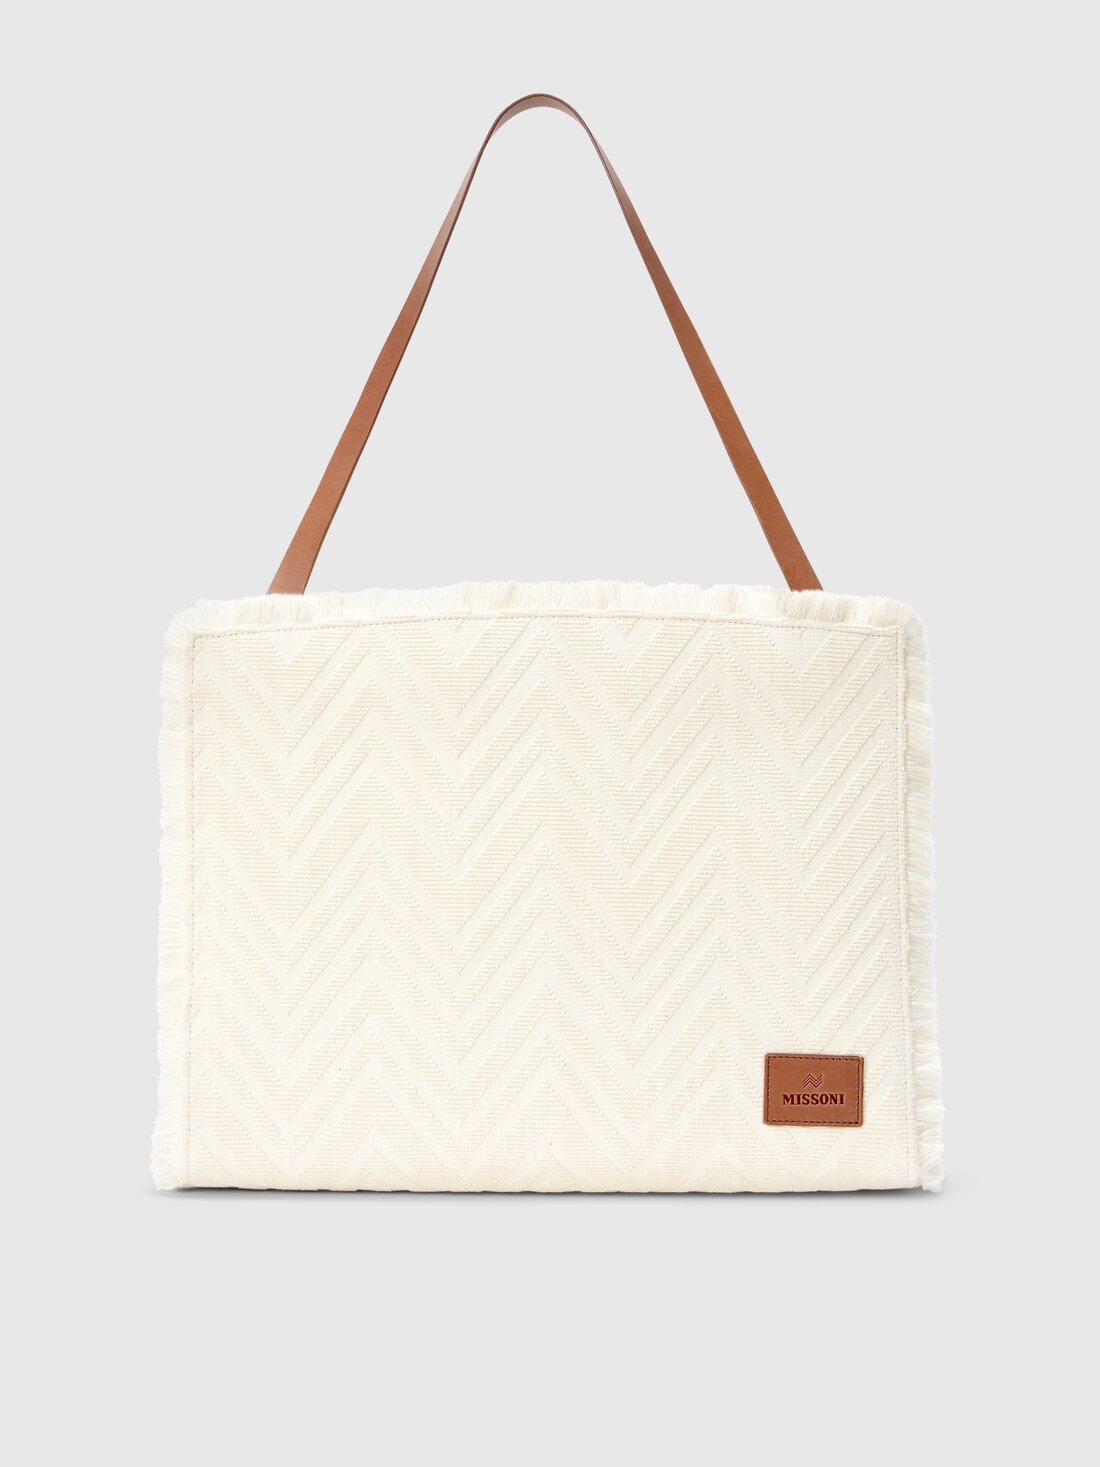 Tote bag in cotton blend with chevron pattern, Brown - 8053147143231 - 0